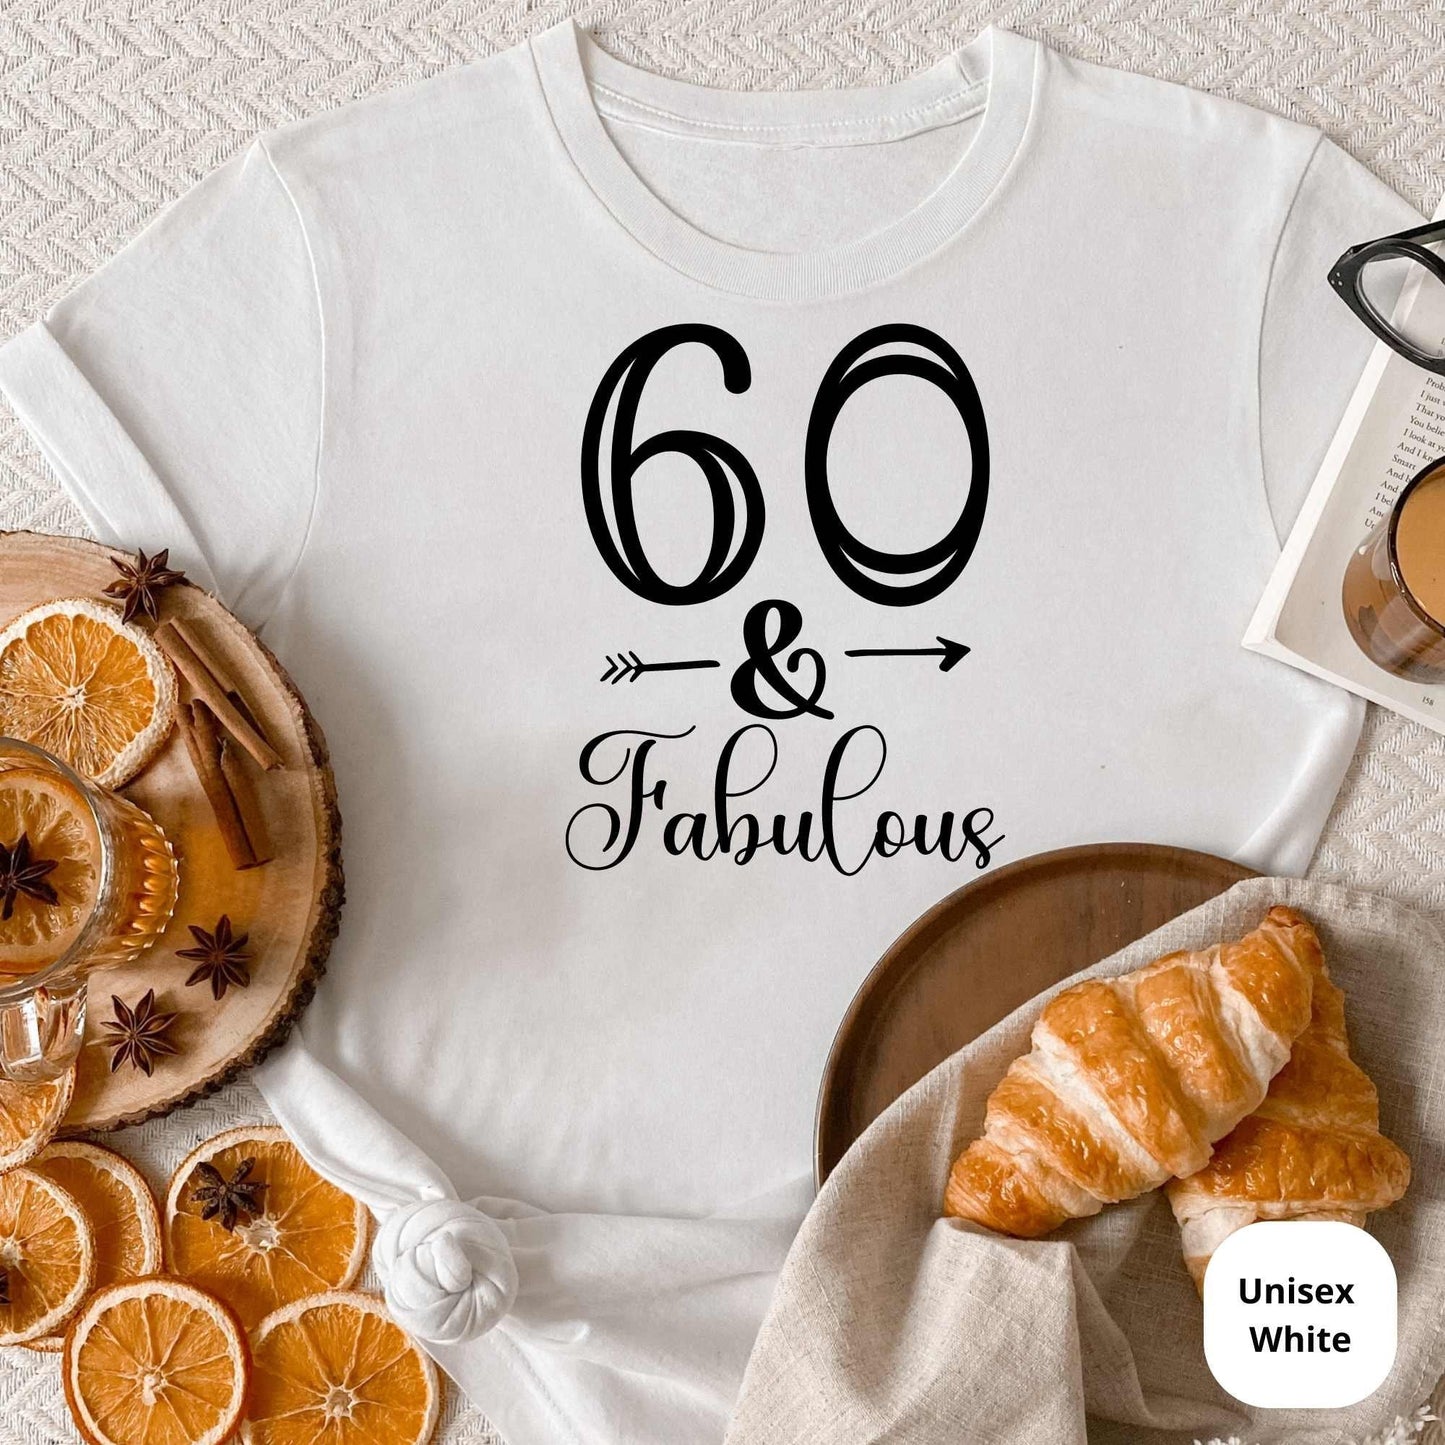 60th Birthday Shirt, 60th Birthday Gifts, Fabulous 60 Tee, Great Gift for Grandma, Mom, Aunties, Cousins & Loved Ones Bday Party Celebration